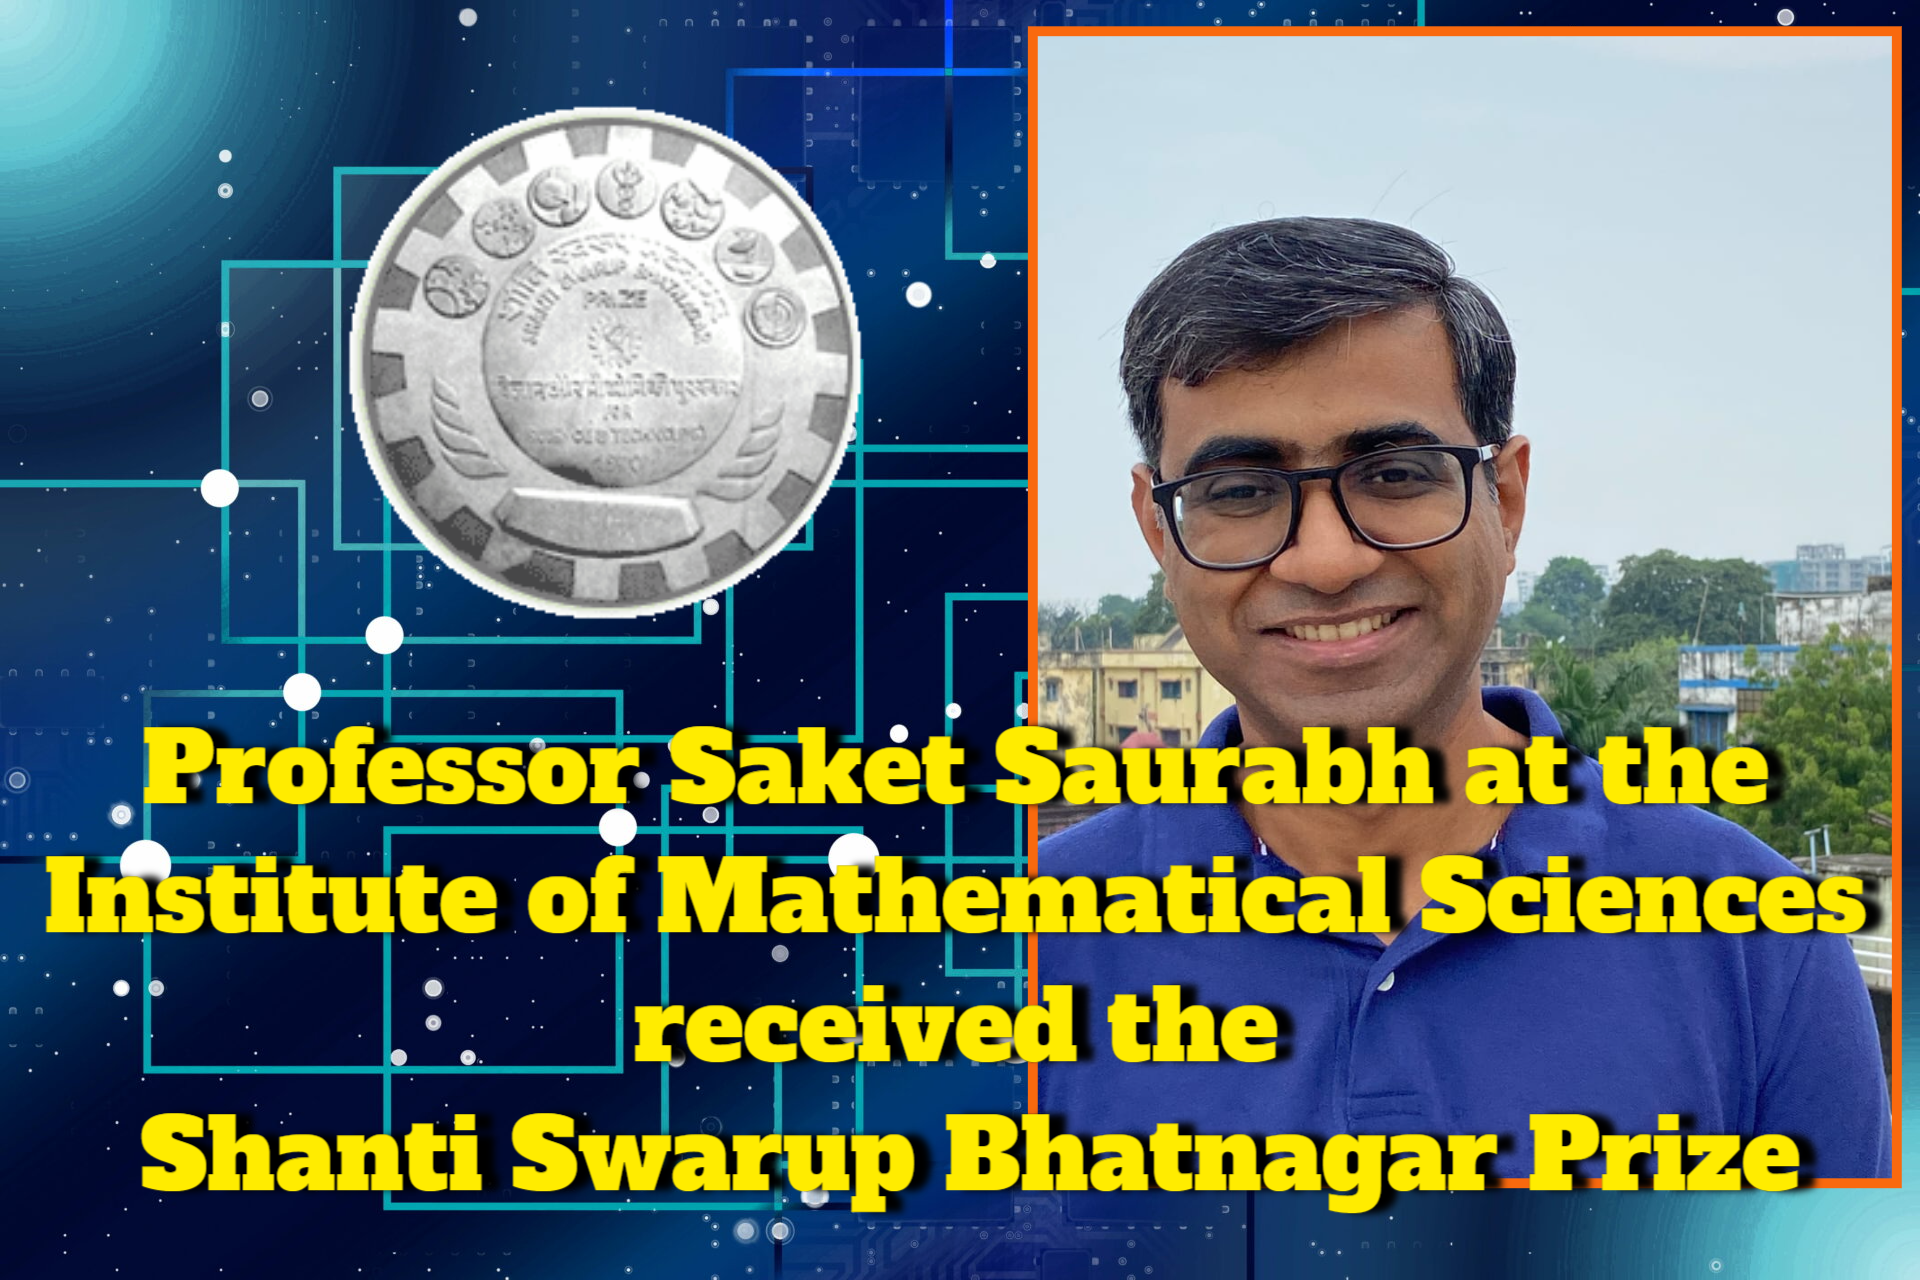 The Shanti Swarup Bhatnagar Prize was awarded to a professor at the Institute of Mathematical Sciences